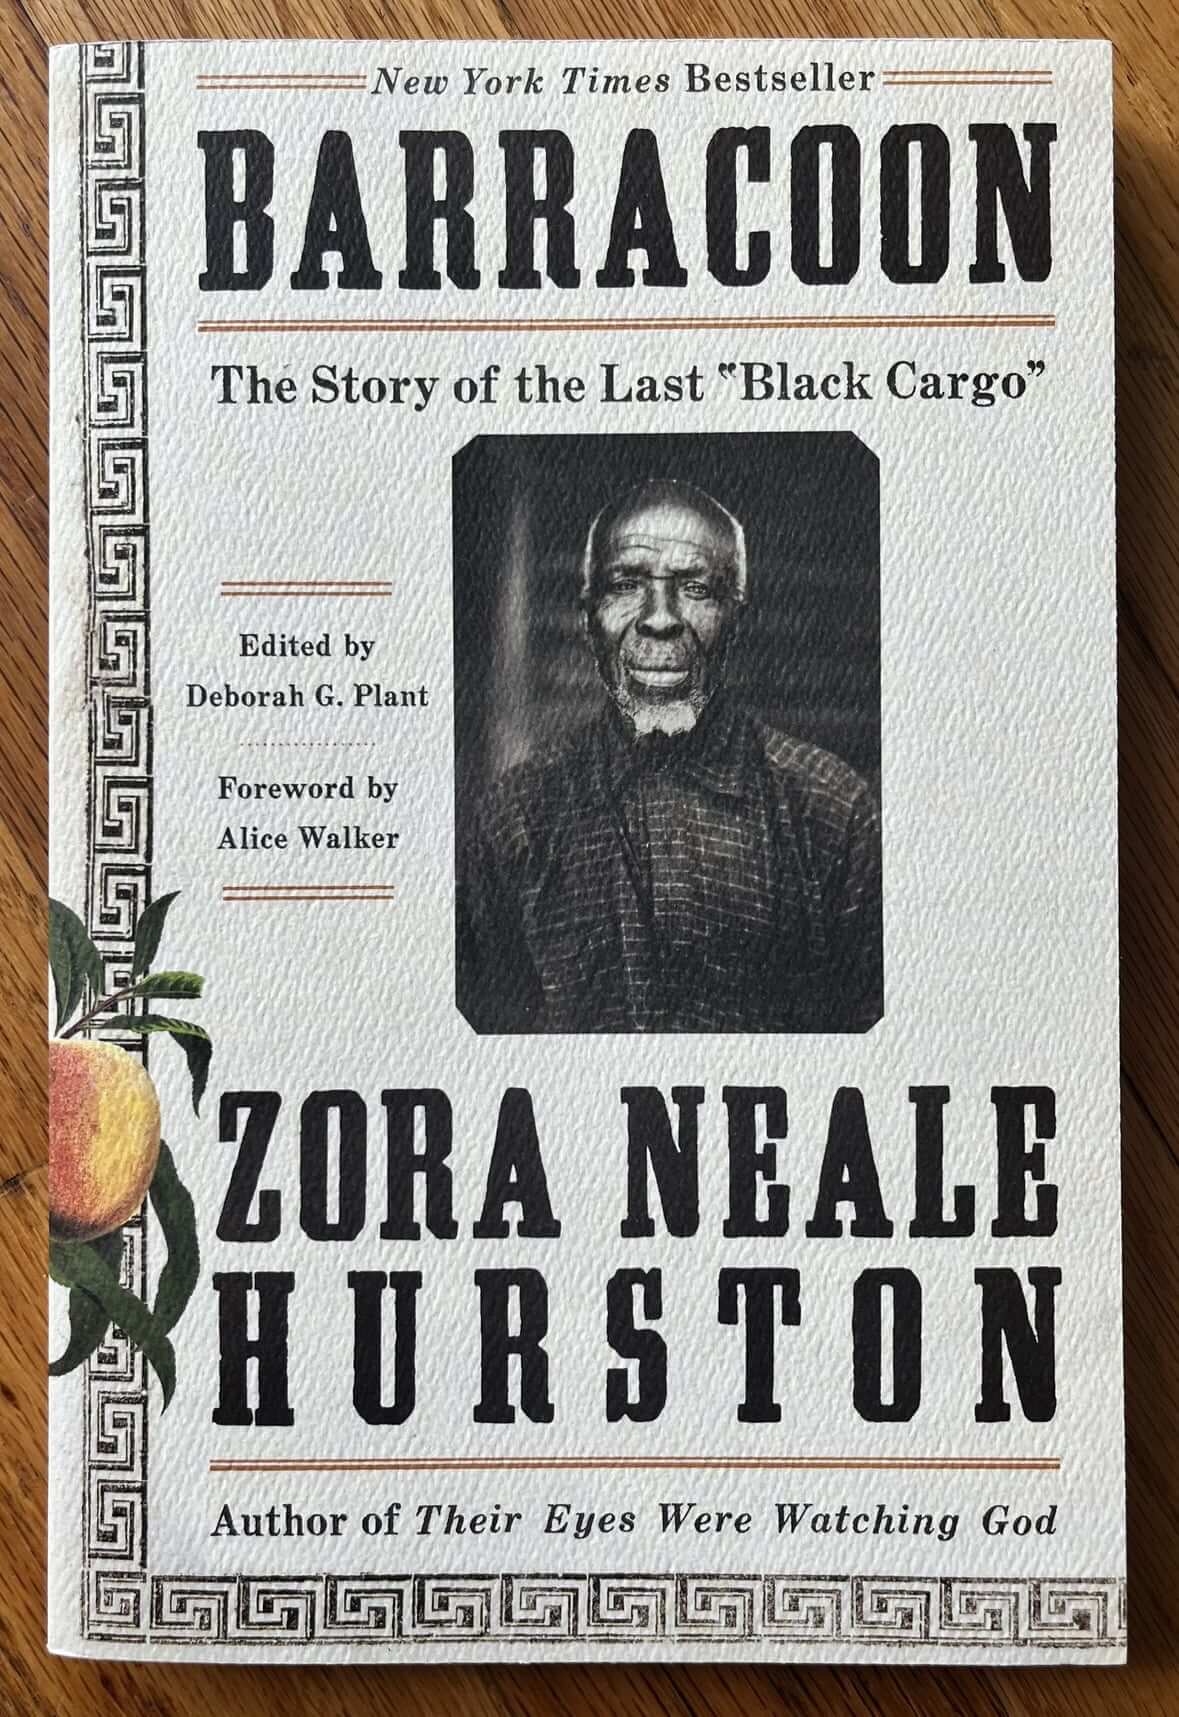 “Barracoon: The Story of the Last ‘Black Cargo’” by Zora Neale Hurston. Edited by Deborah G. Plant. Foreword by Alice Walker.